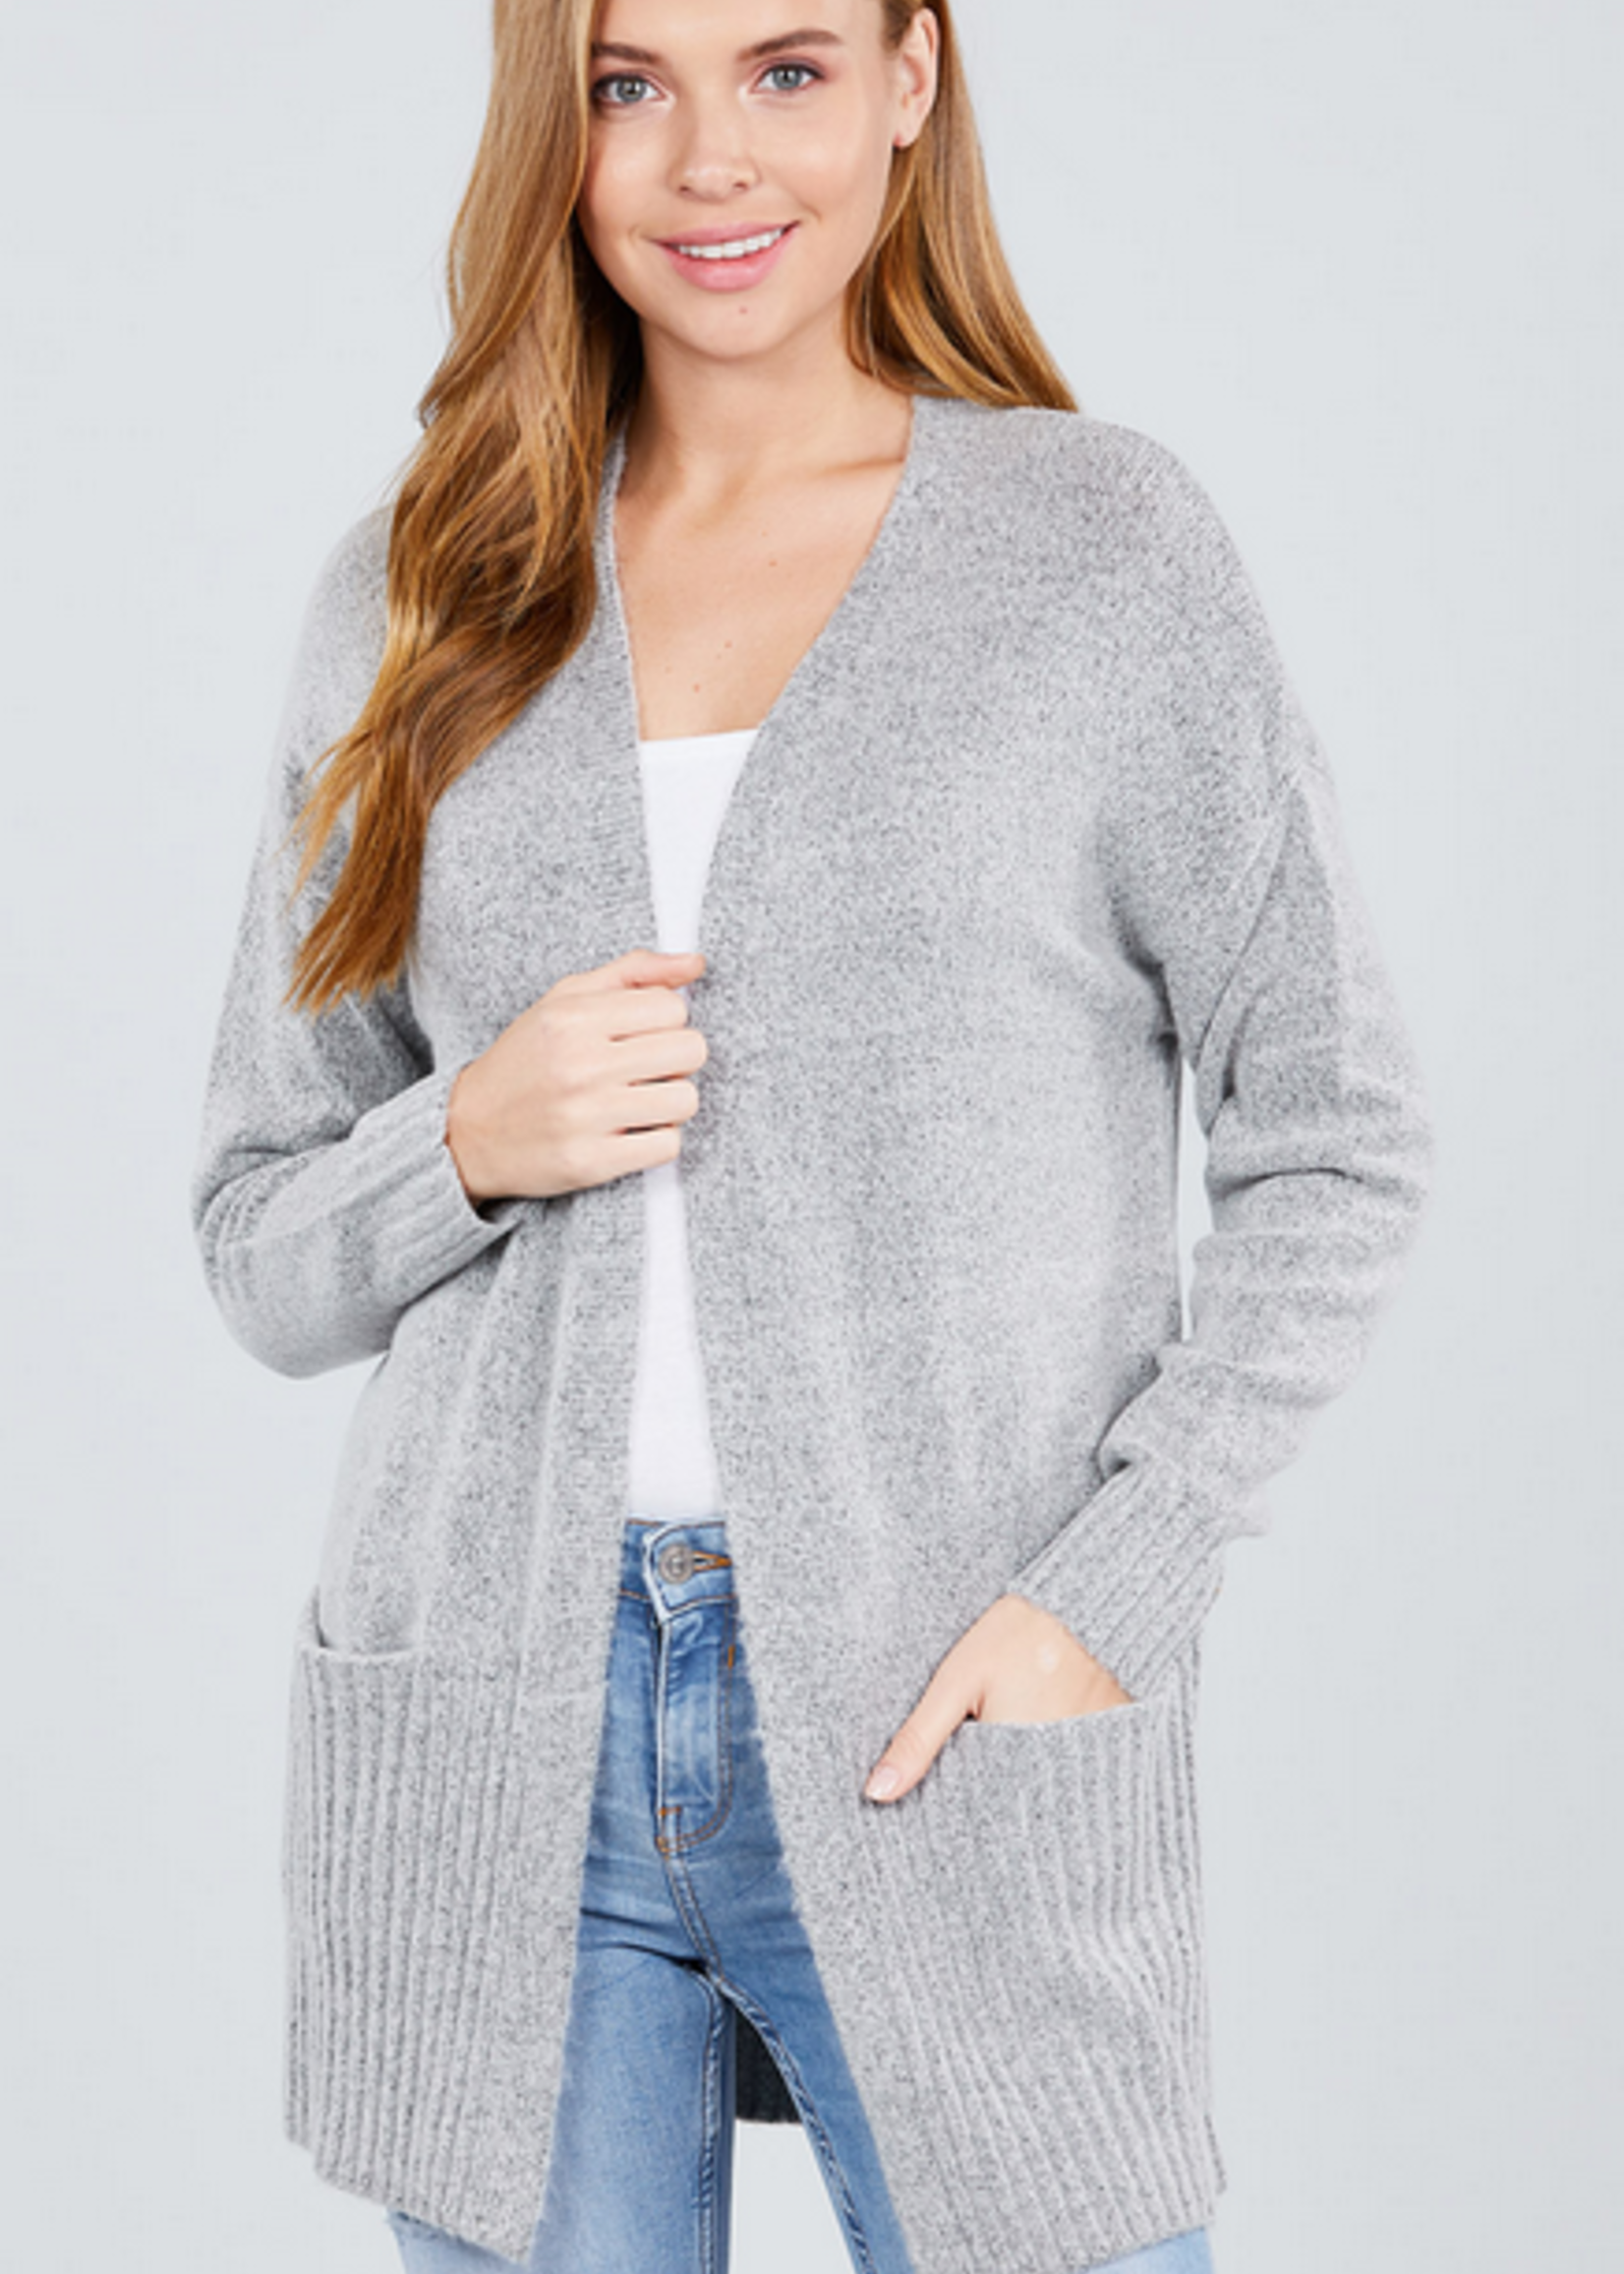 Active USA - Open Front Sweater Cardigan - SW10751 - Oly's Home Fashion